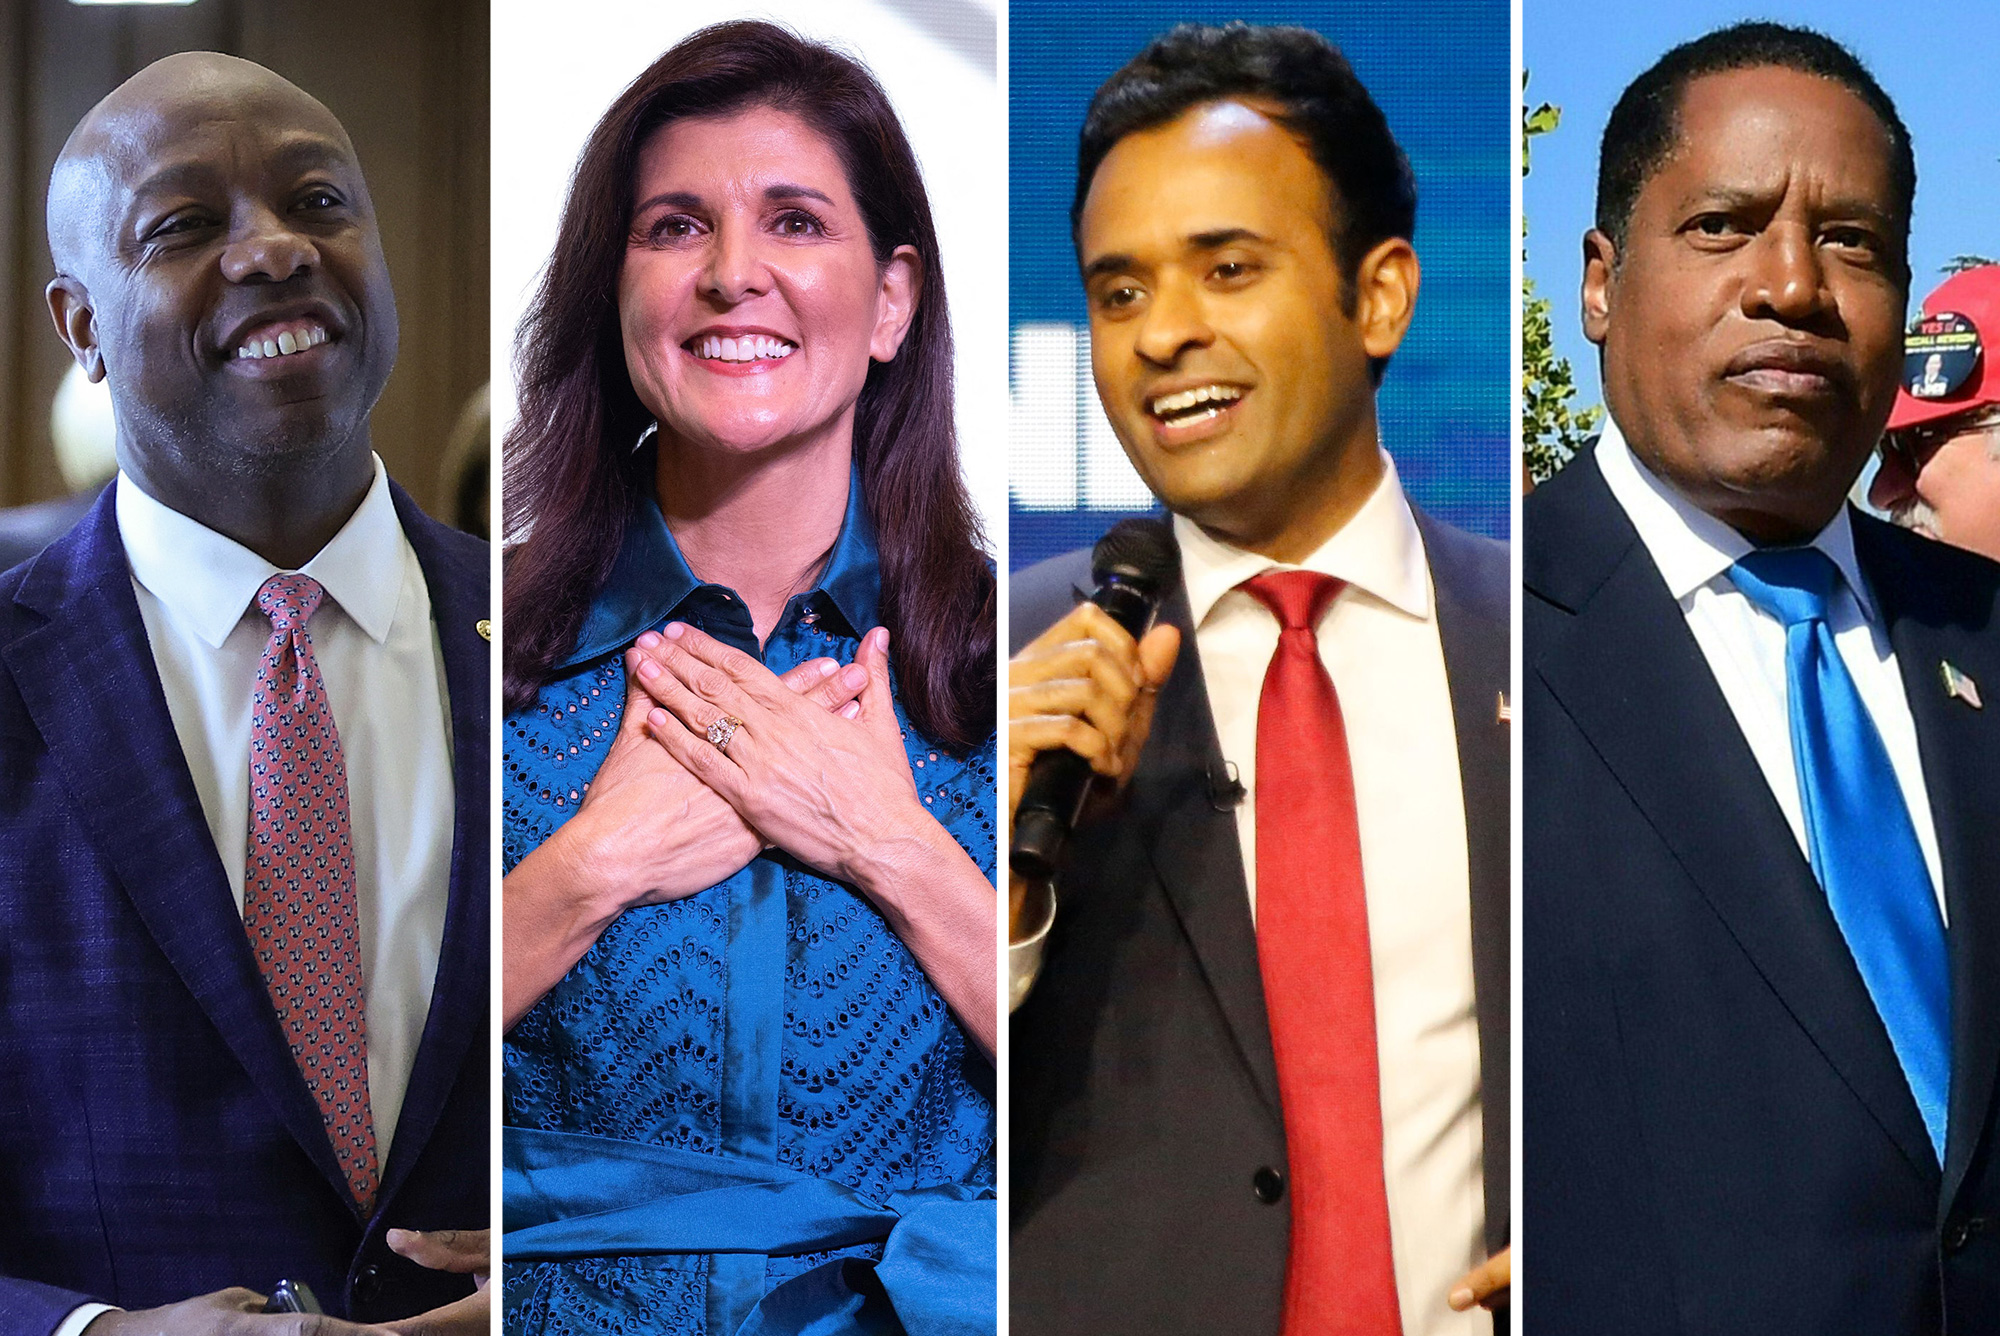 GOP's 2024 Presidential Field Looks Historically Diverse